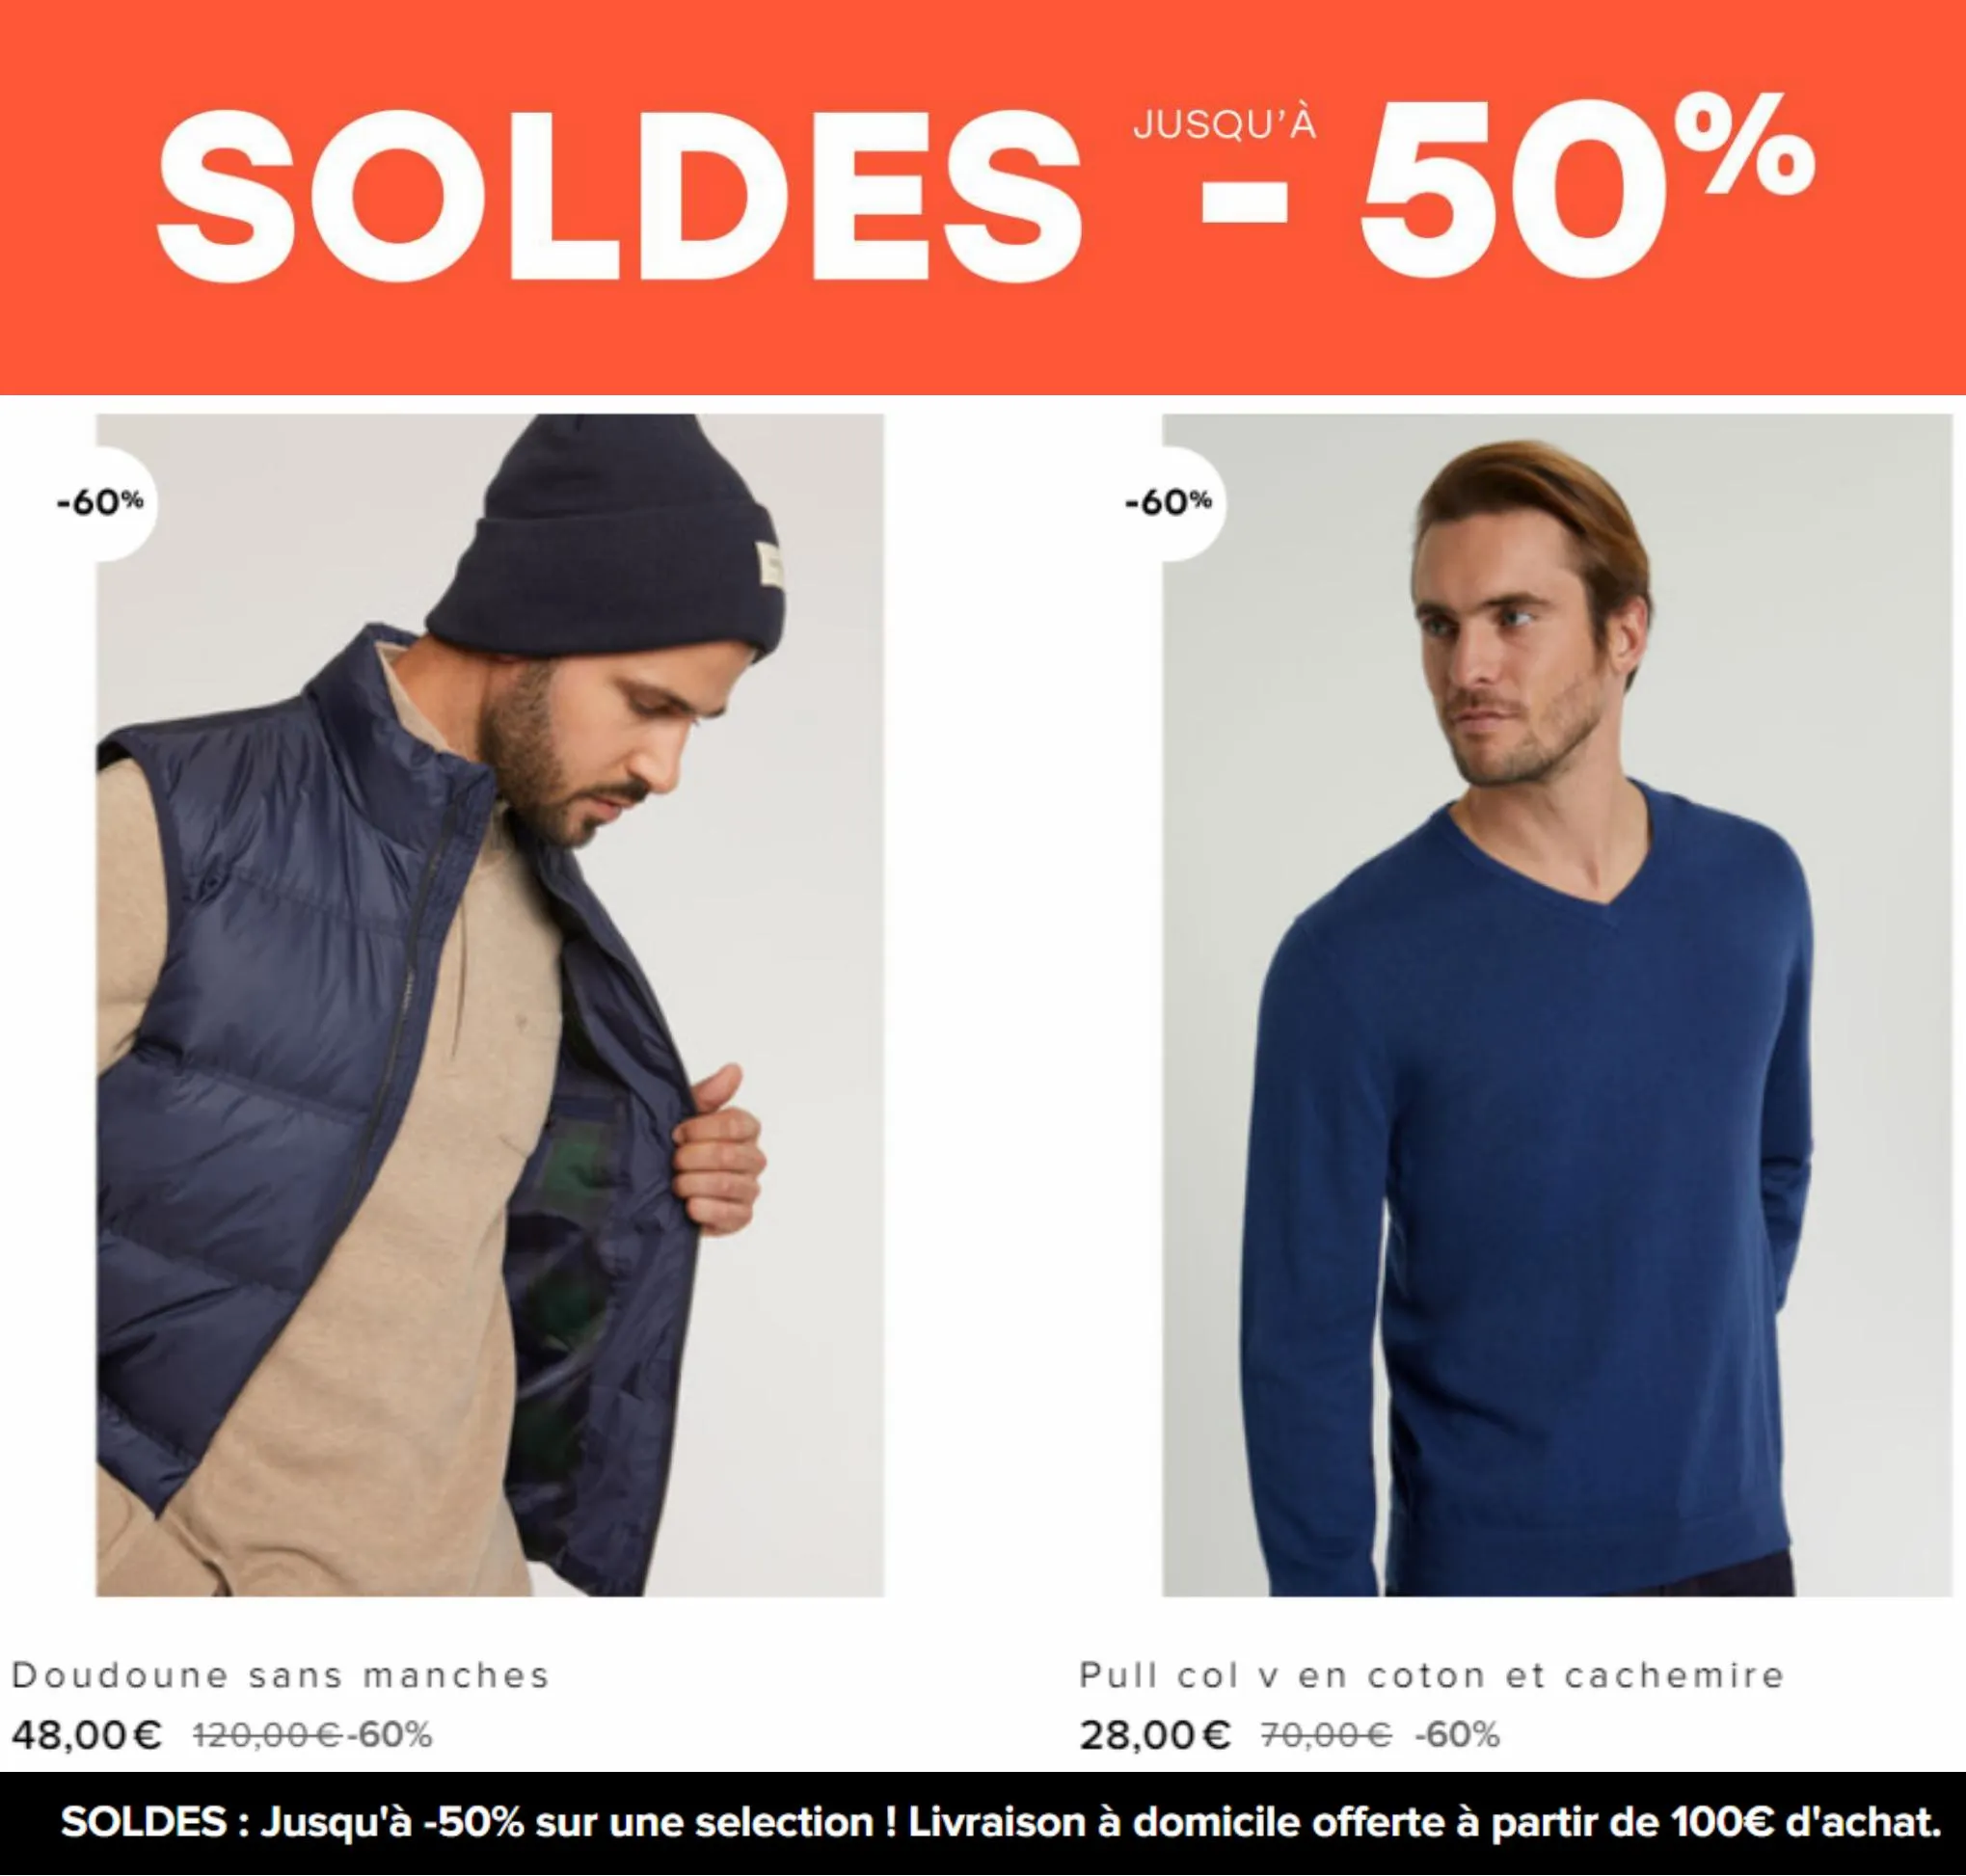 Catalogue Soldes -50% Homme, page 00002